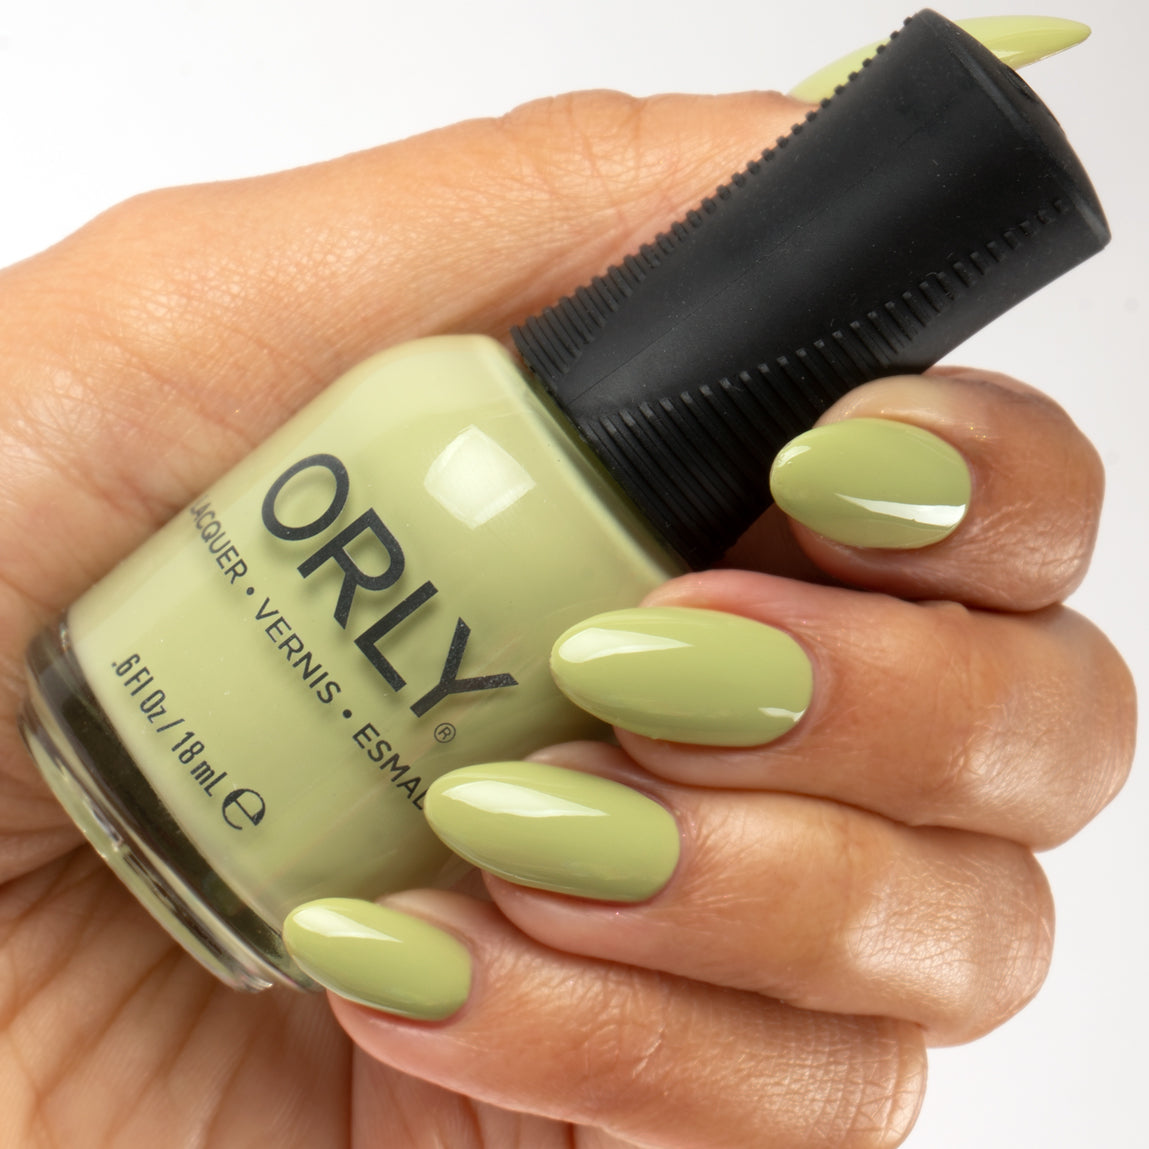 Orly Spring 2010 Collection – Bloom – Part I